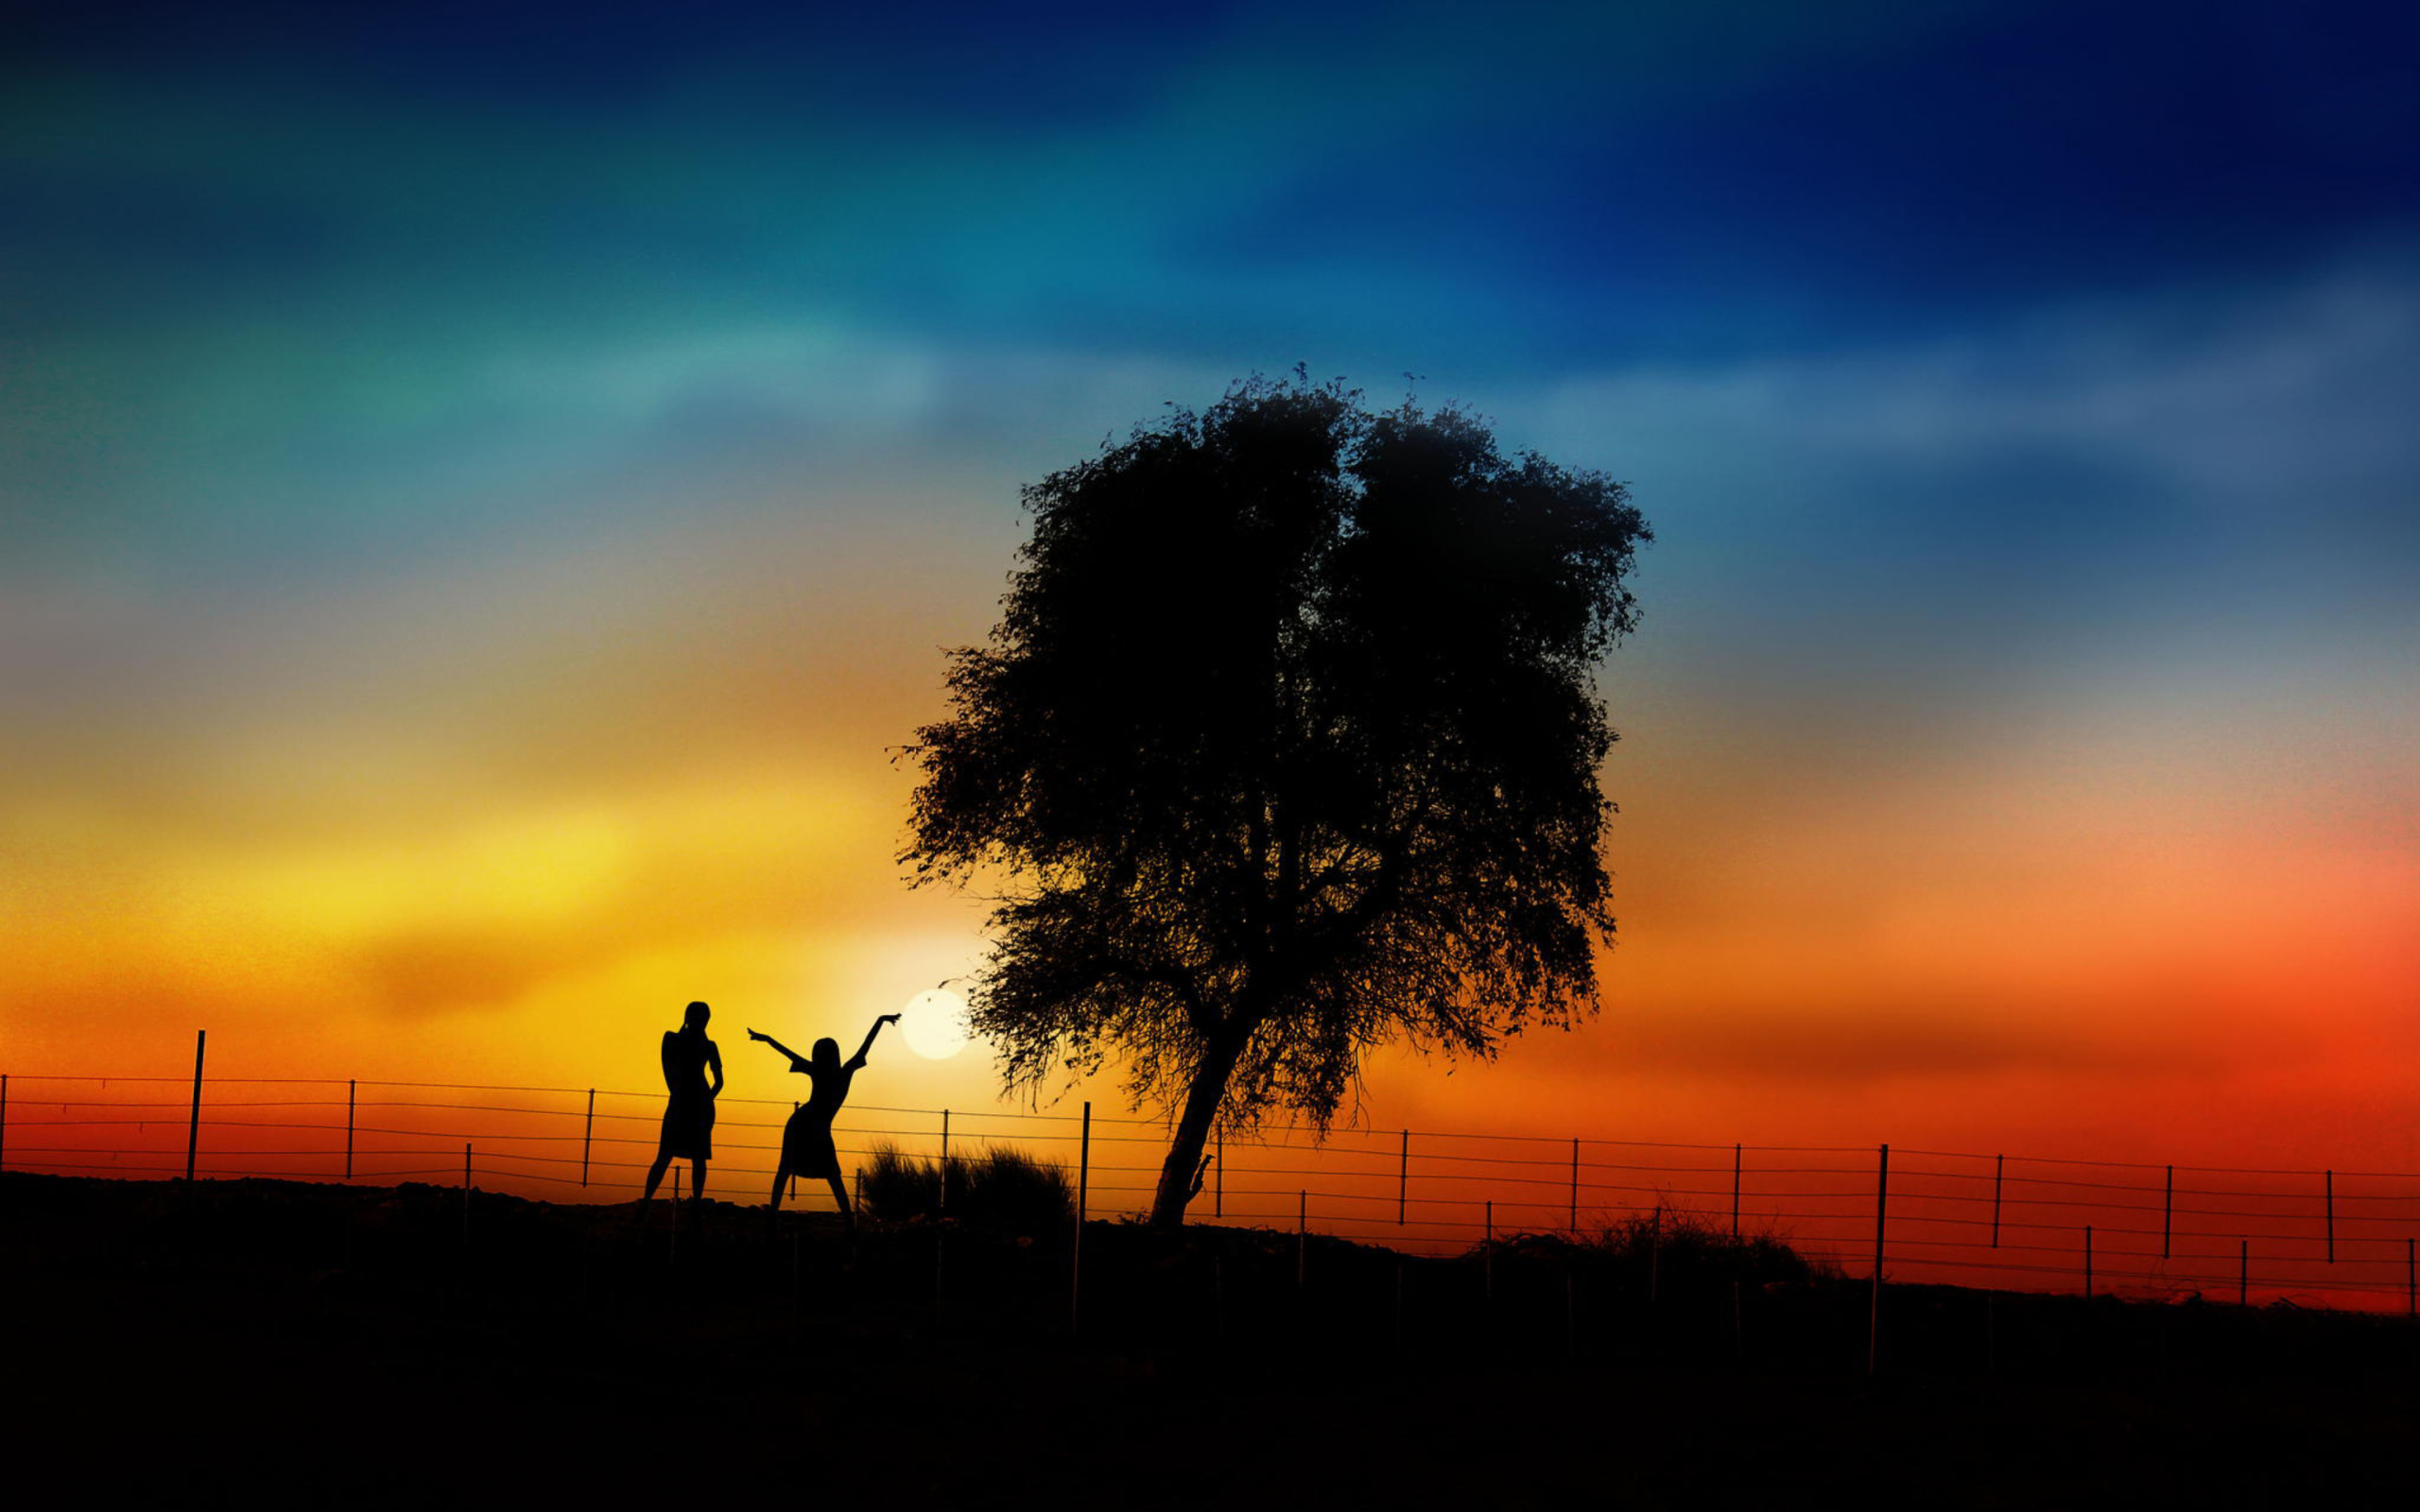 Couple Silhouettes Under Tree At Sunset wallpaper 2560x1600